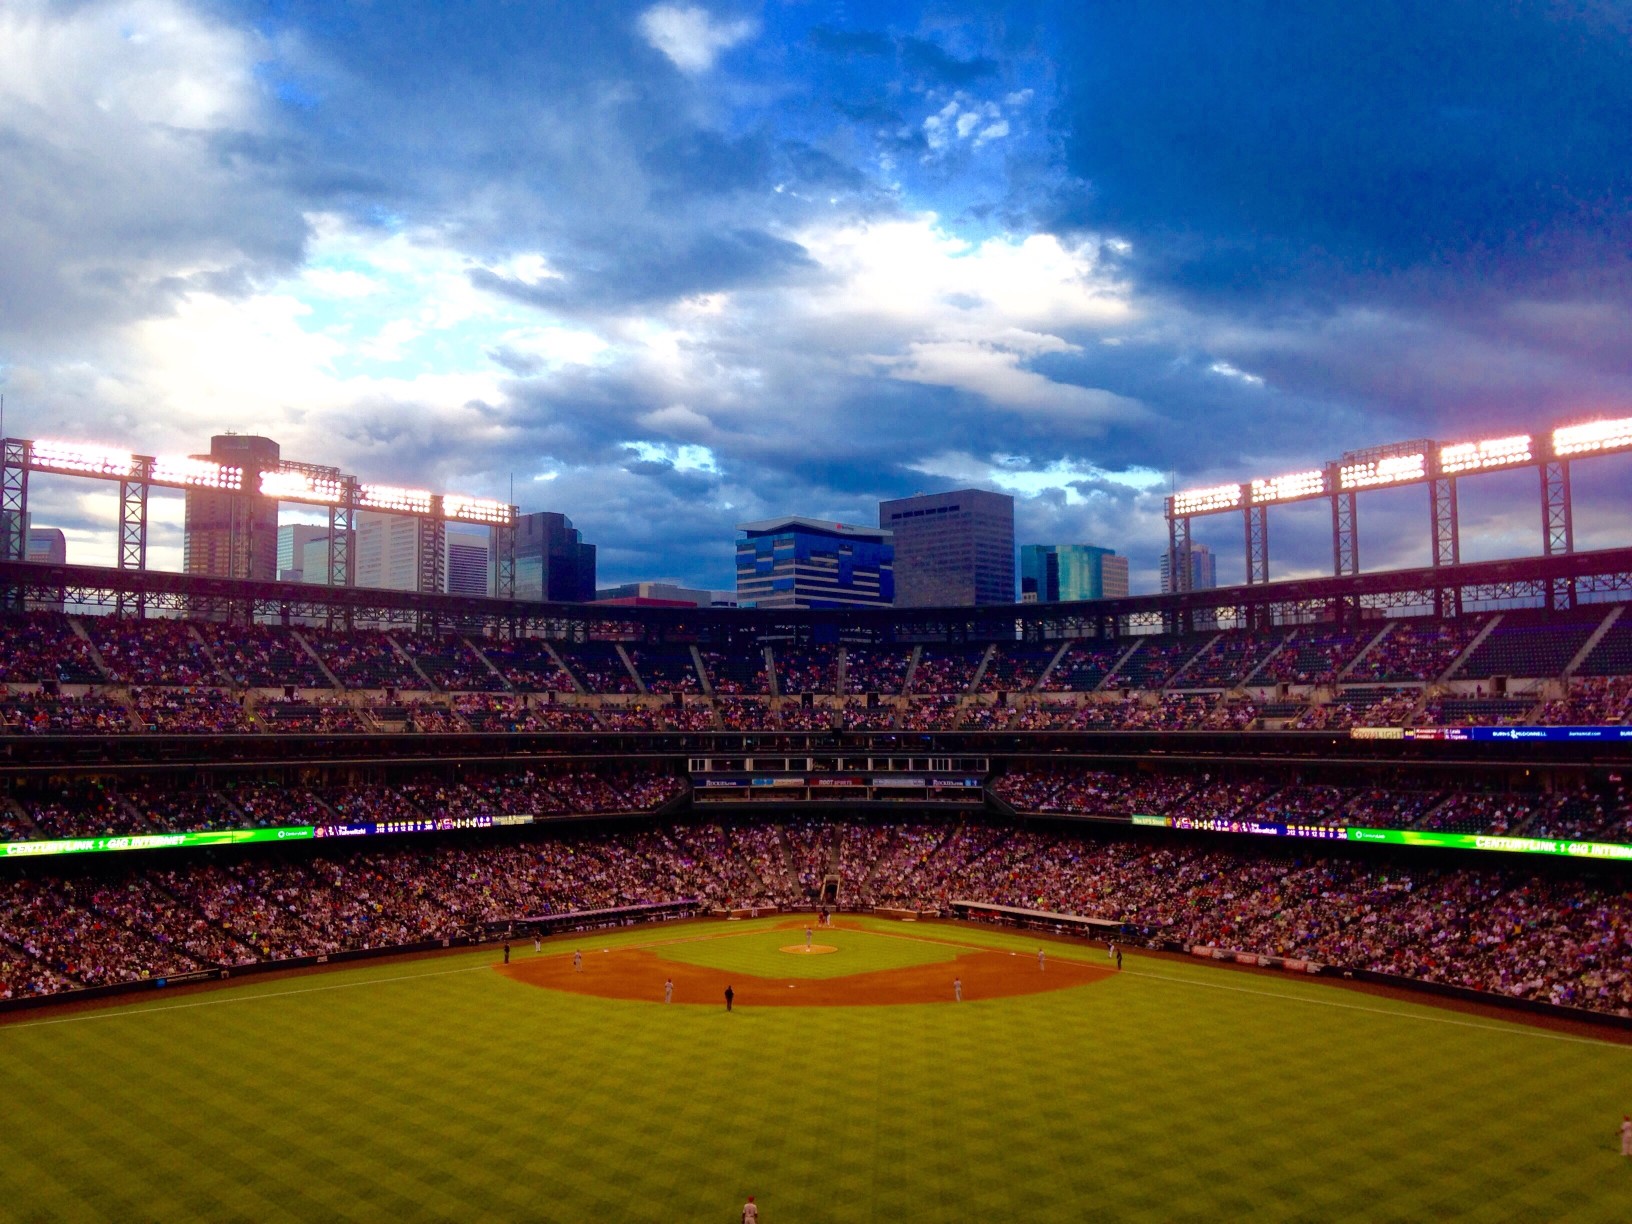 Coors Field in the evening